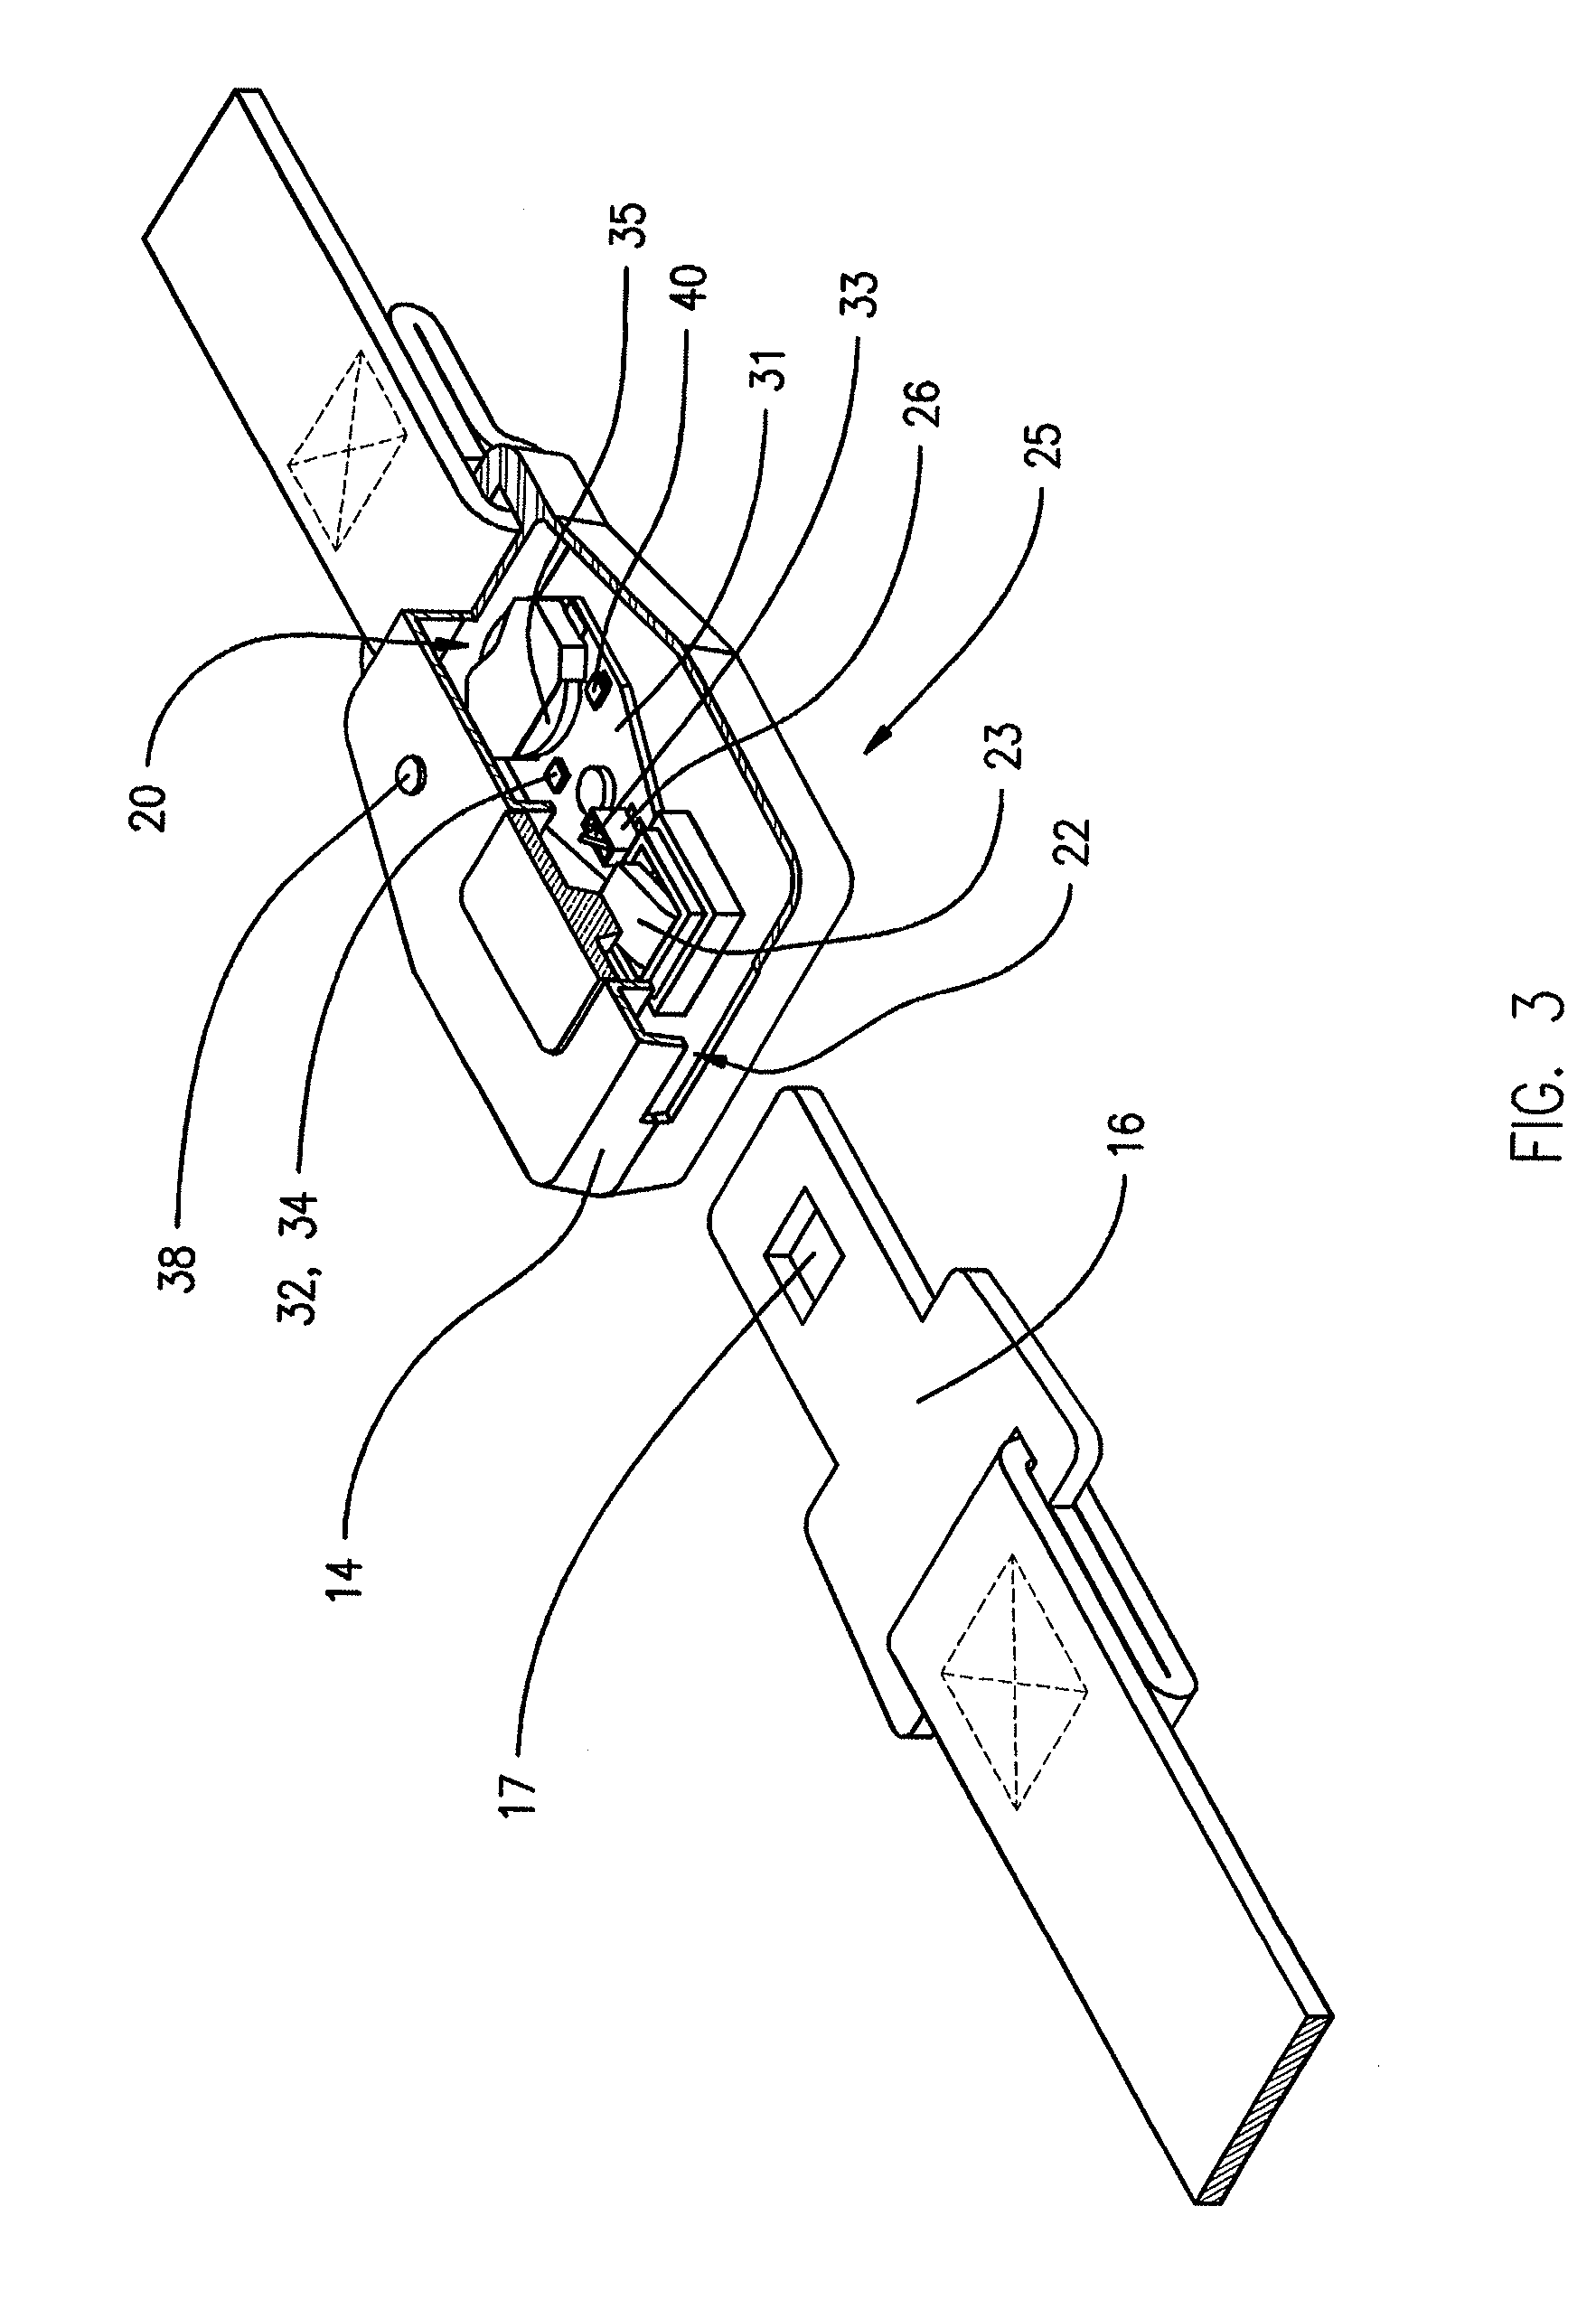 Warning system for detecting infant seat buckle securement